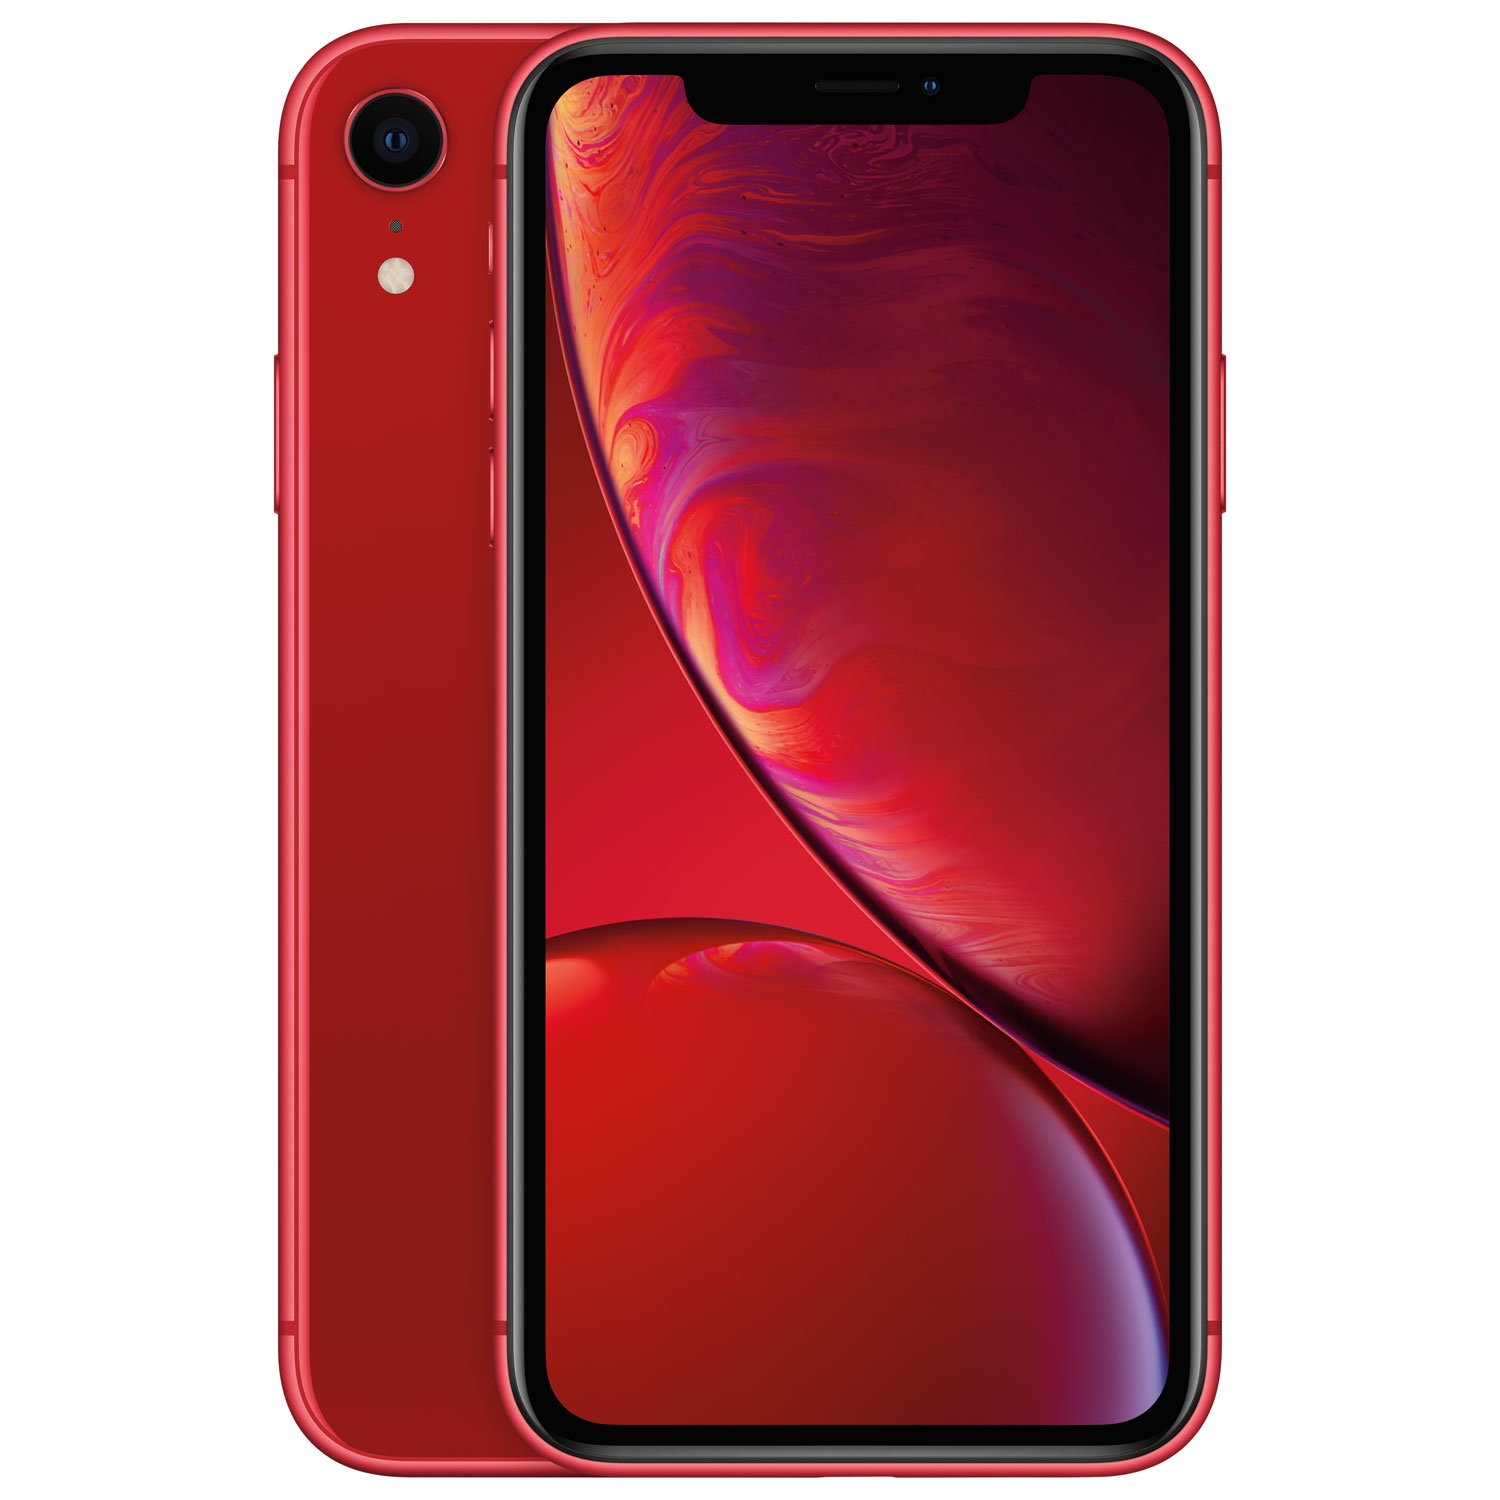 Refurbished (Good) - Apple iPhone XR 256GB Smartphone - (Product)RED - Unlocked